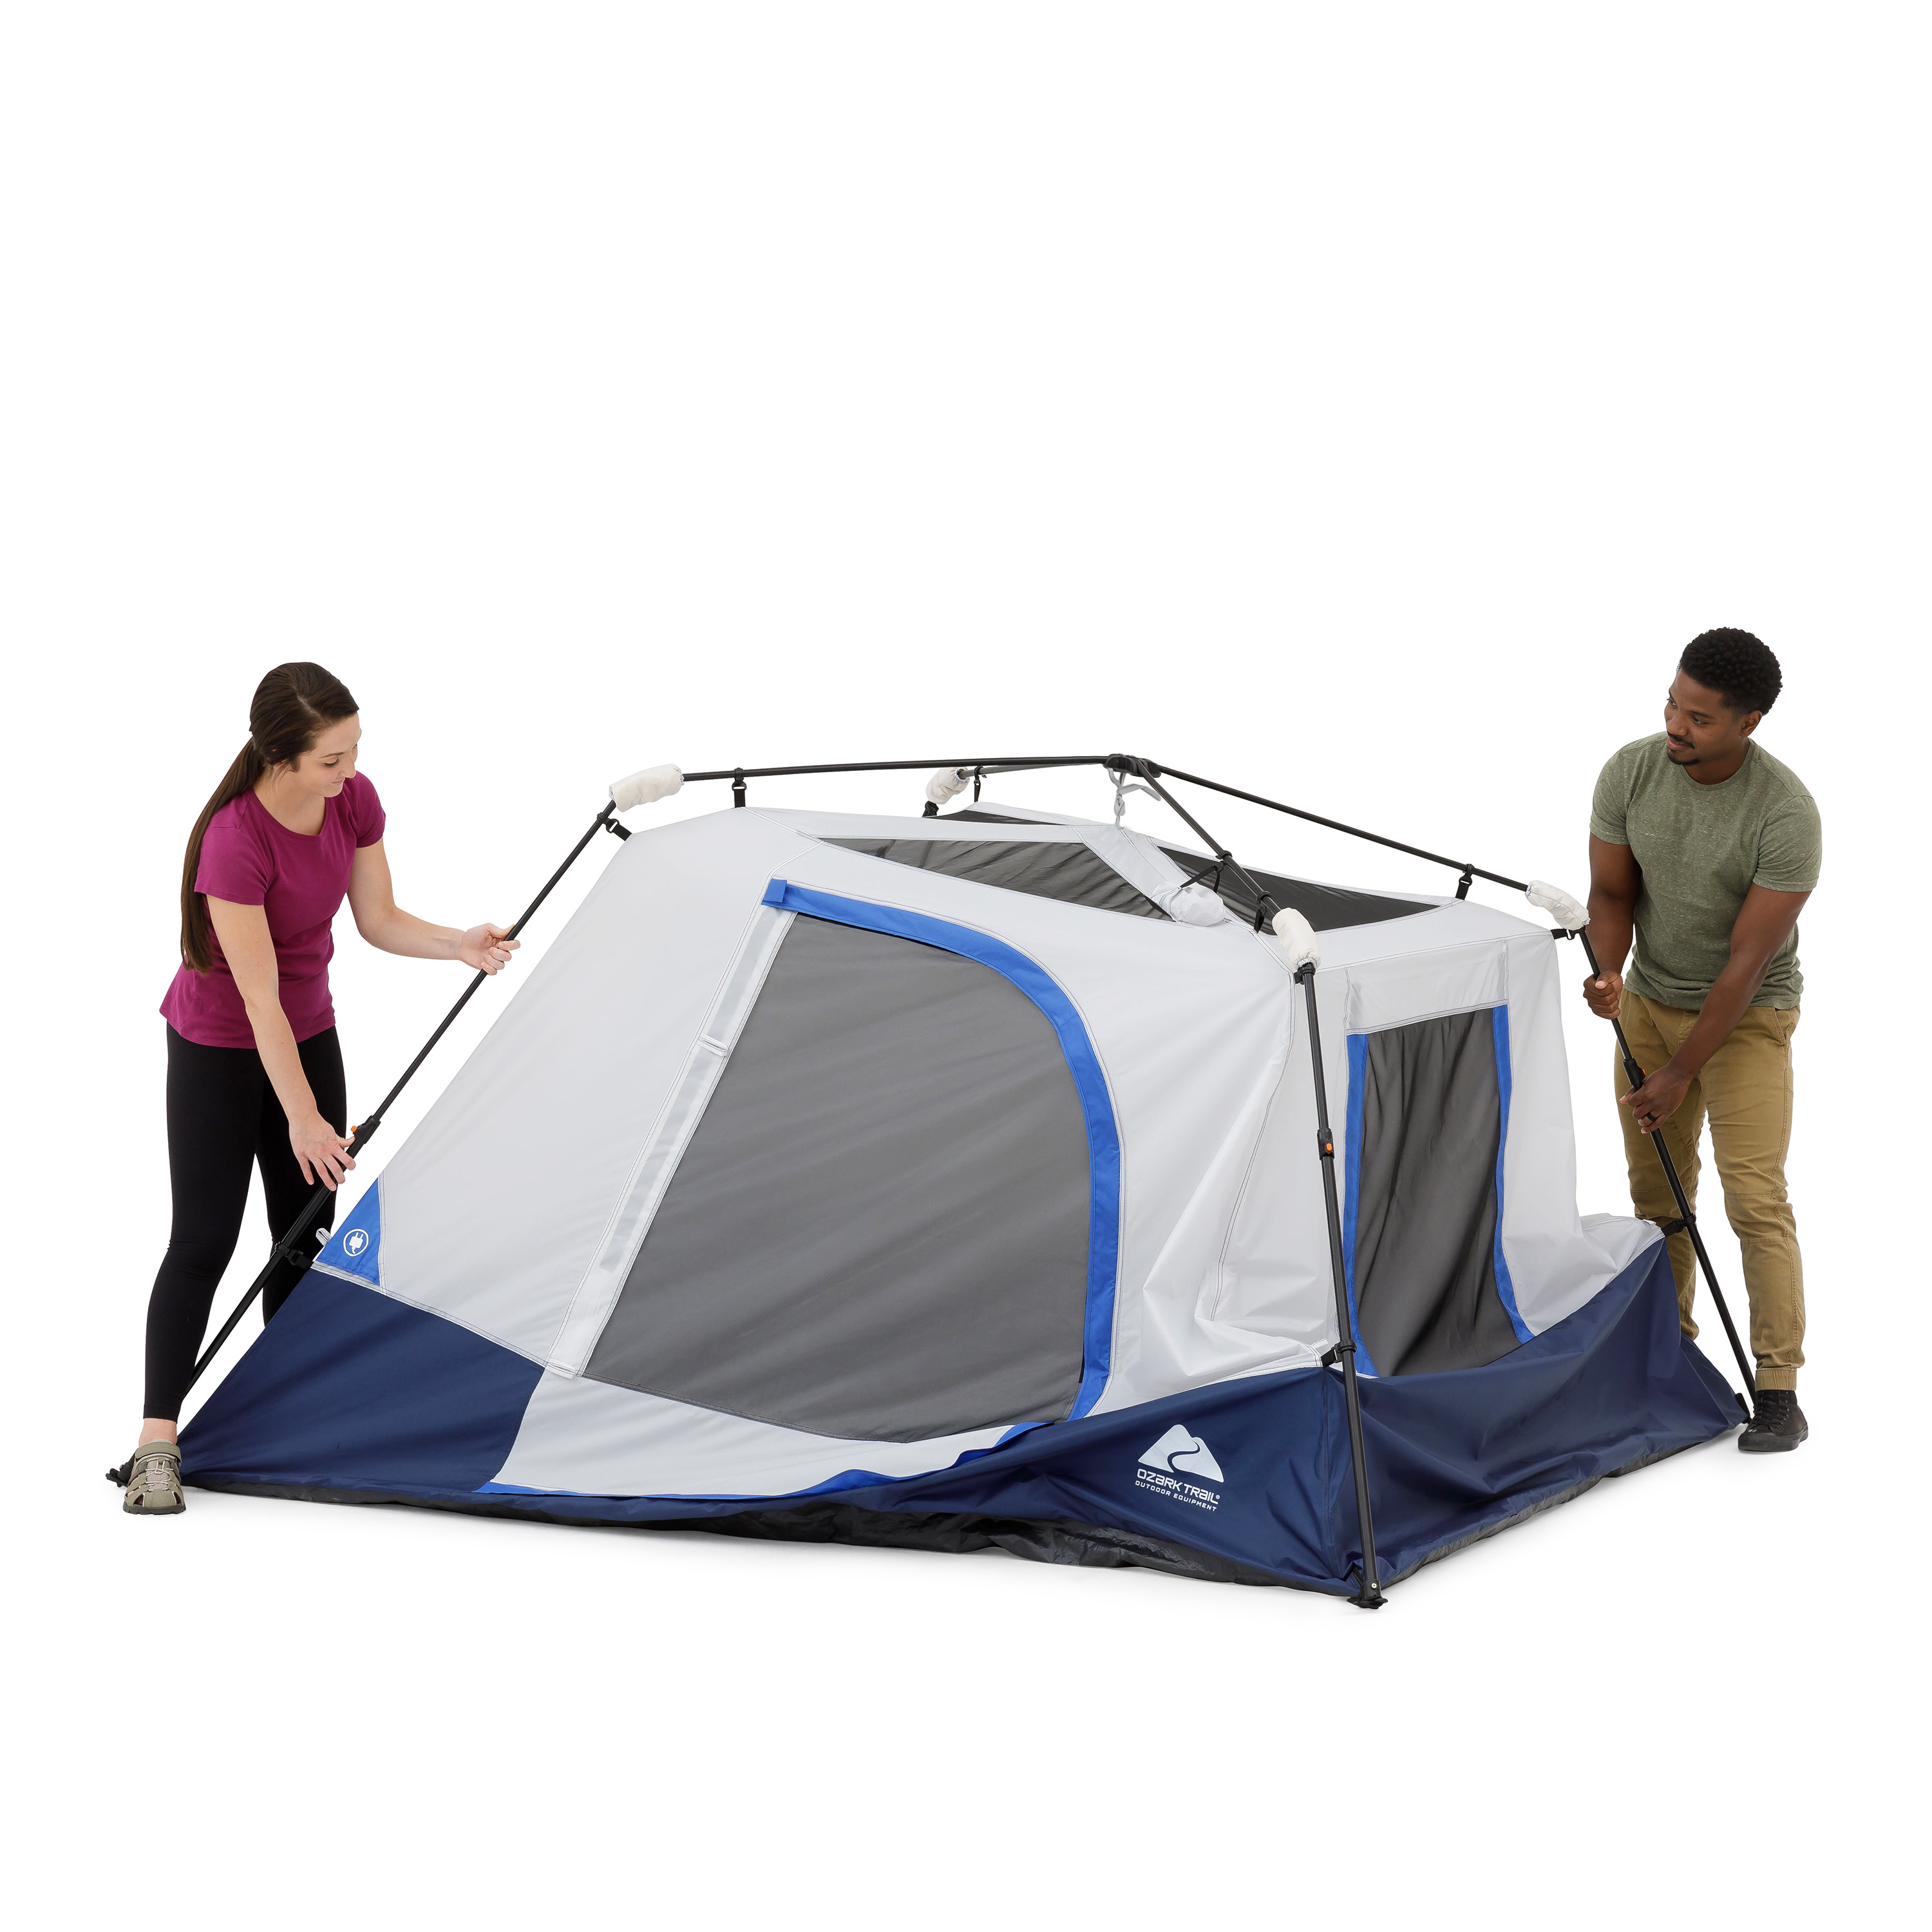 Ozark Trail 4 Piece, Tent, Chair and Table Camping Combo - image 6 of 15